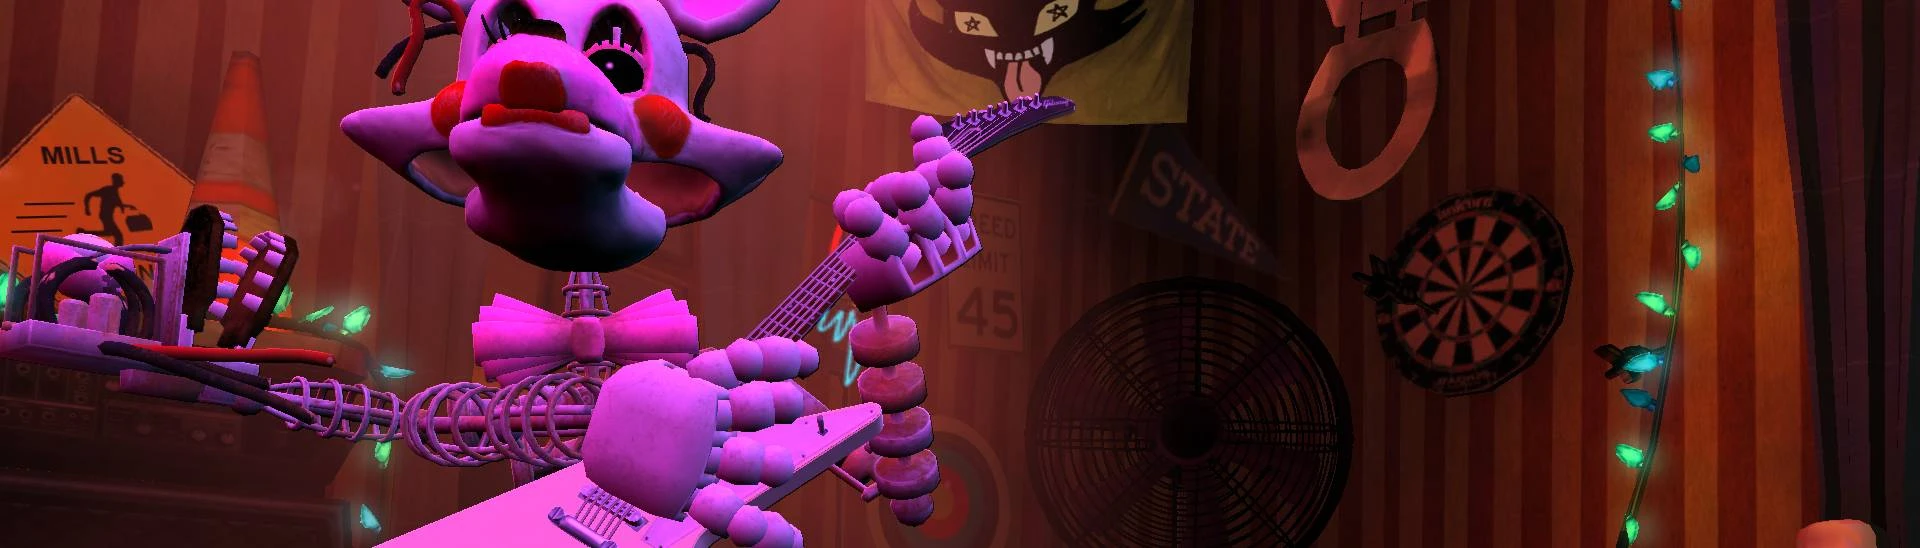 Five Nights at Freddy's 2 system requirements